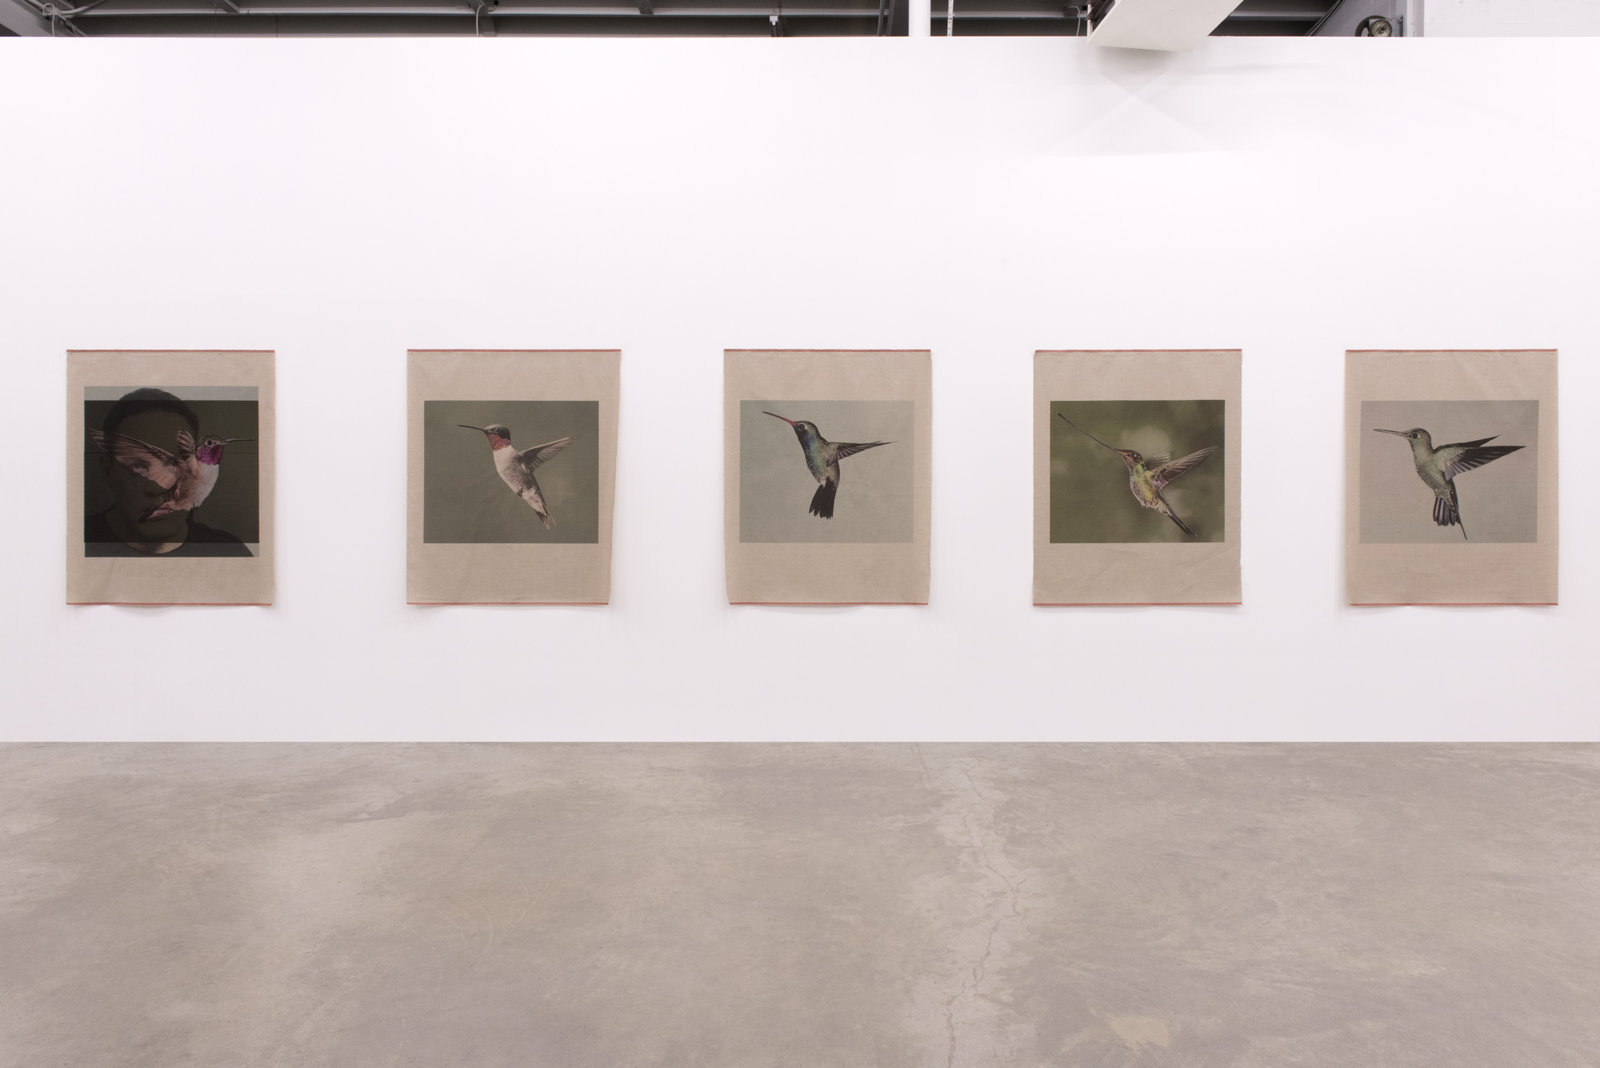 Duane Linklater, You chose feathers, 2014, 5 inkjet prints on linen, nails, each print: 54 x 43 inches (136 x 110 cm)